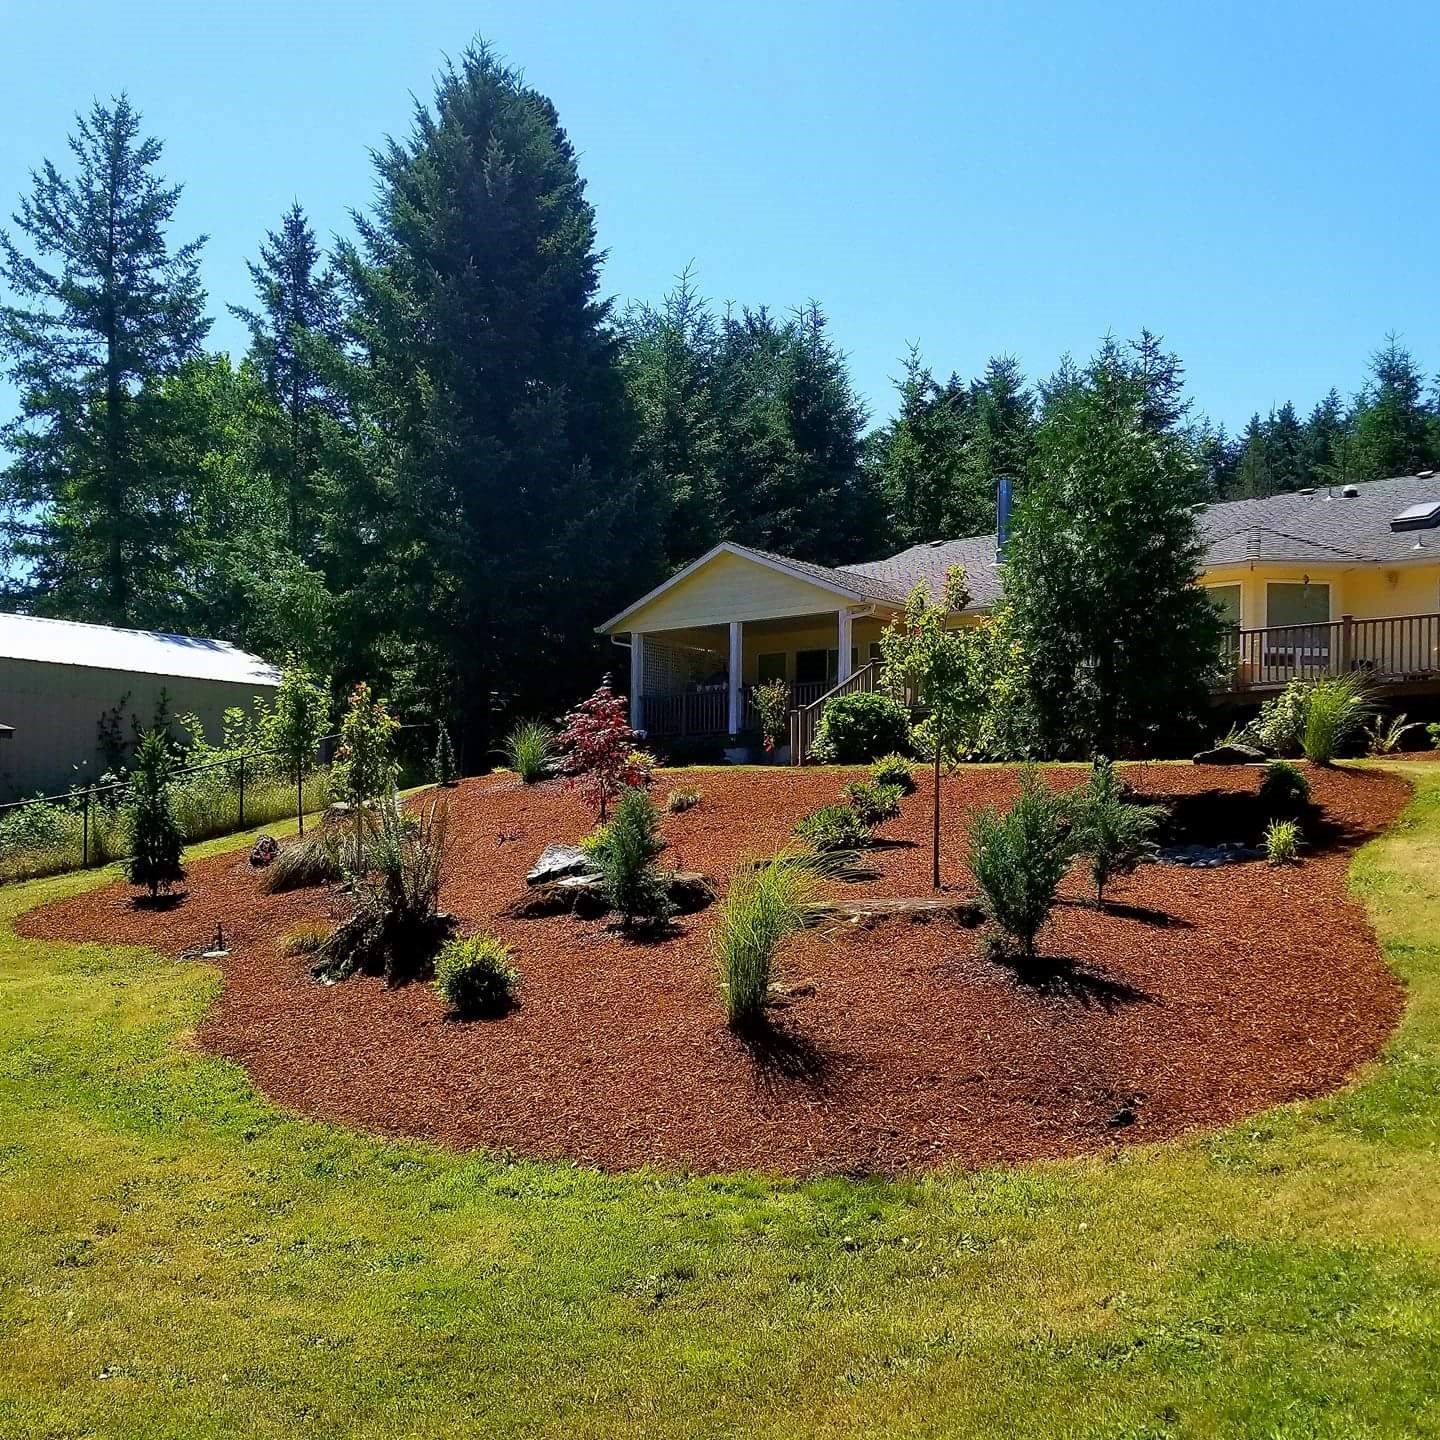 At Siegmund Landscape Supply We Believe That Talented Landscapers Plus Quality Products Equals Stunning Functional Landscape Design Many Of Oregon S Santiam Canyon And Mid Willamette Valley Landscape Contractors Come To Our Barkyard To